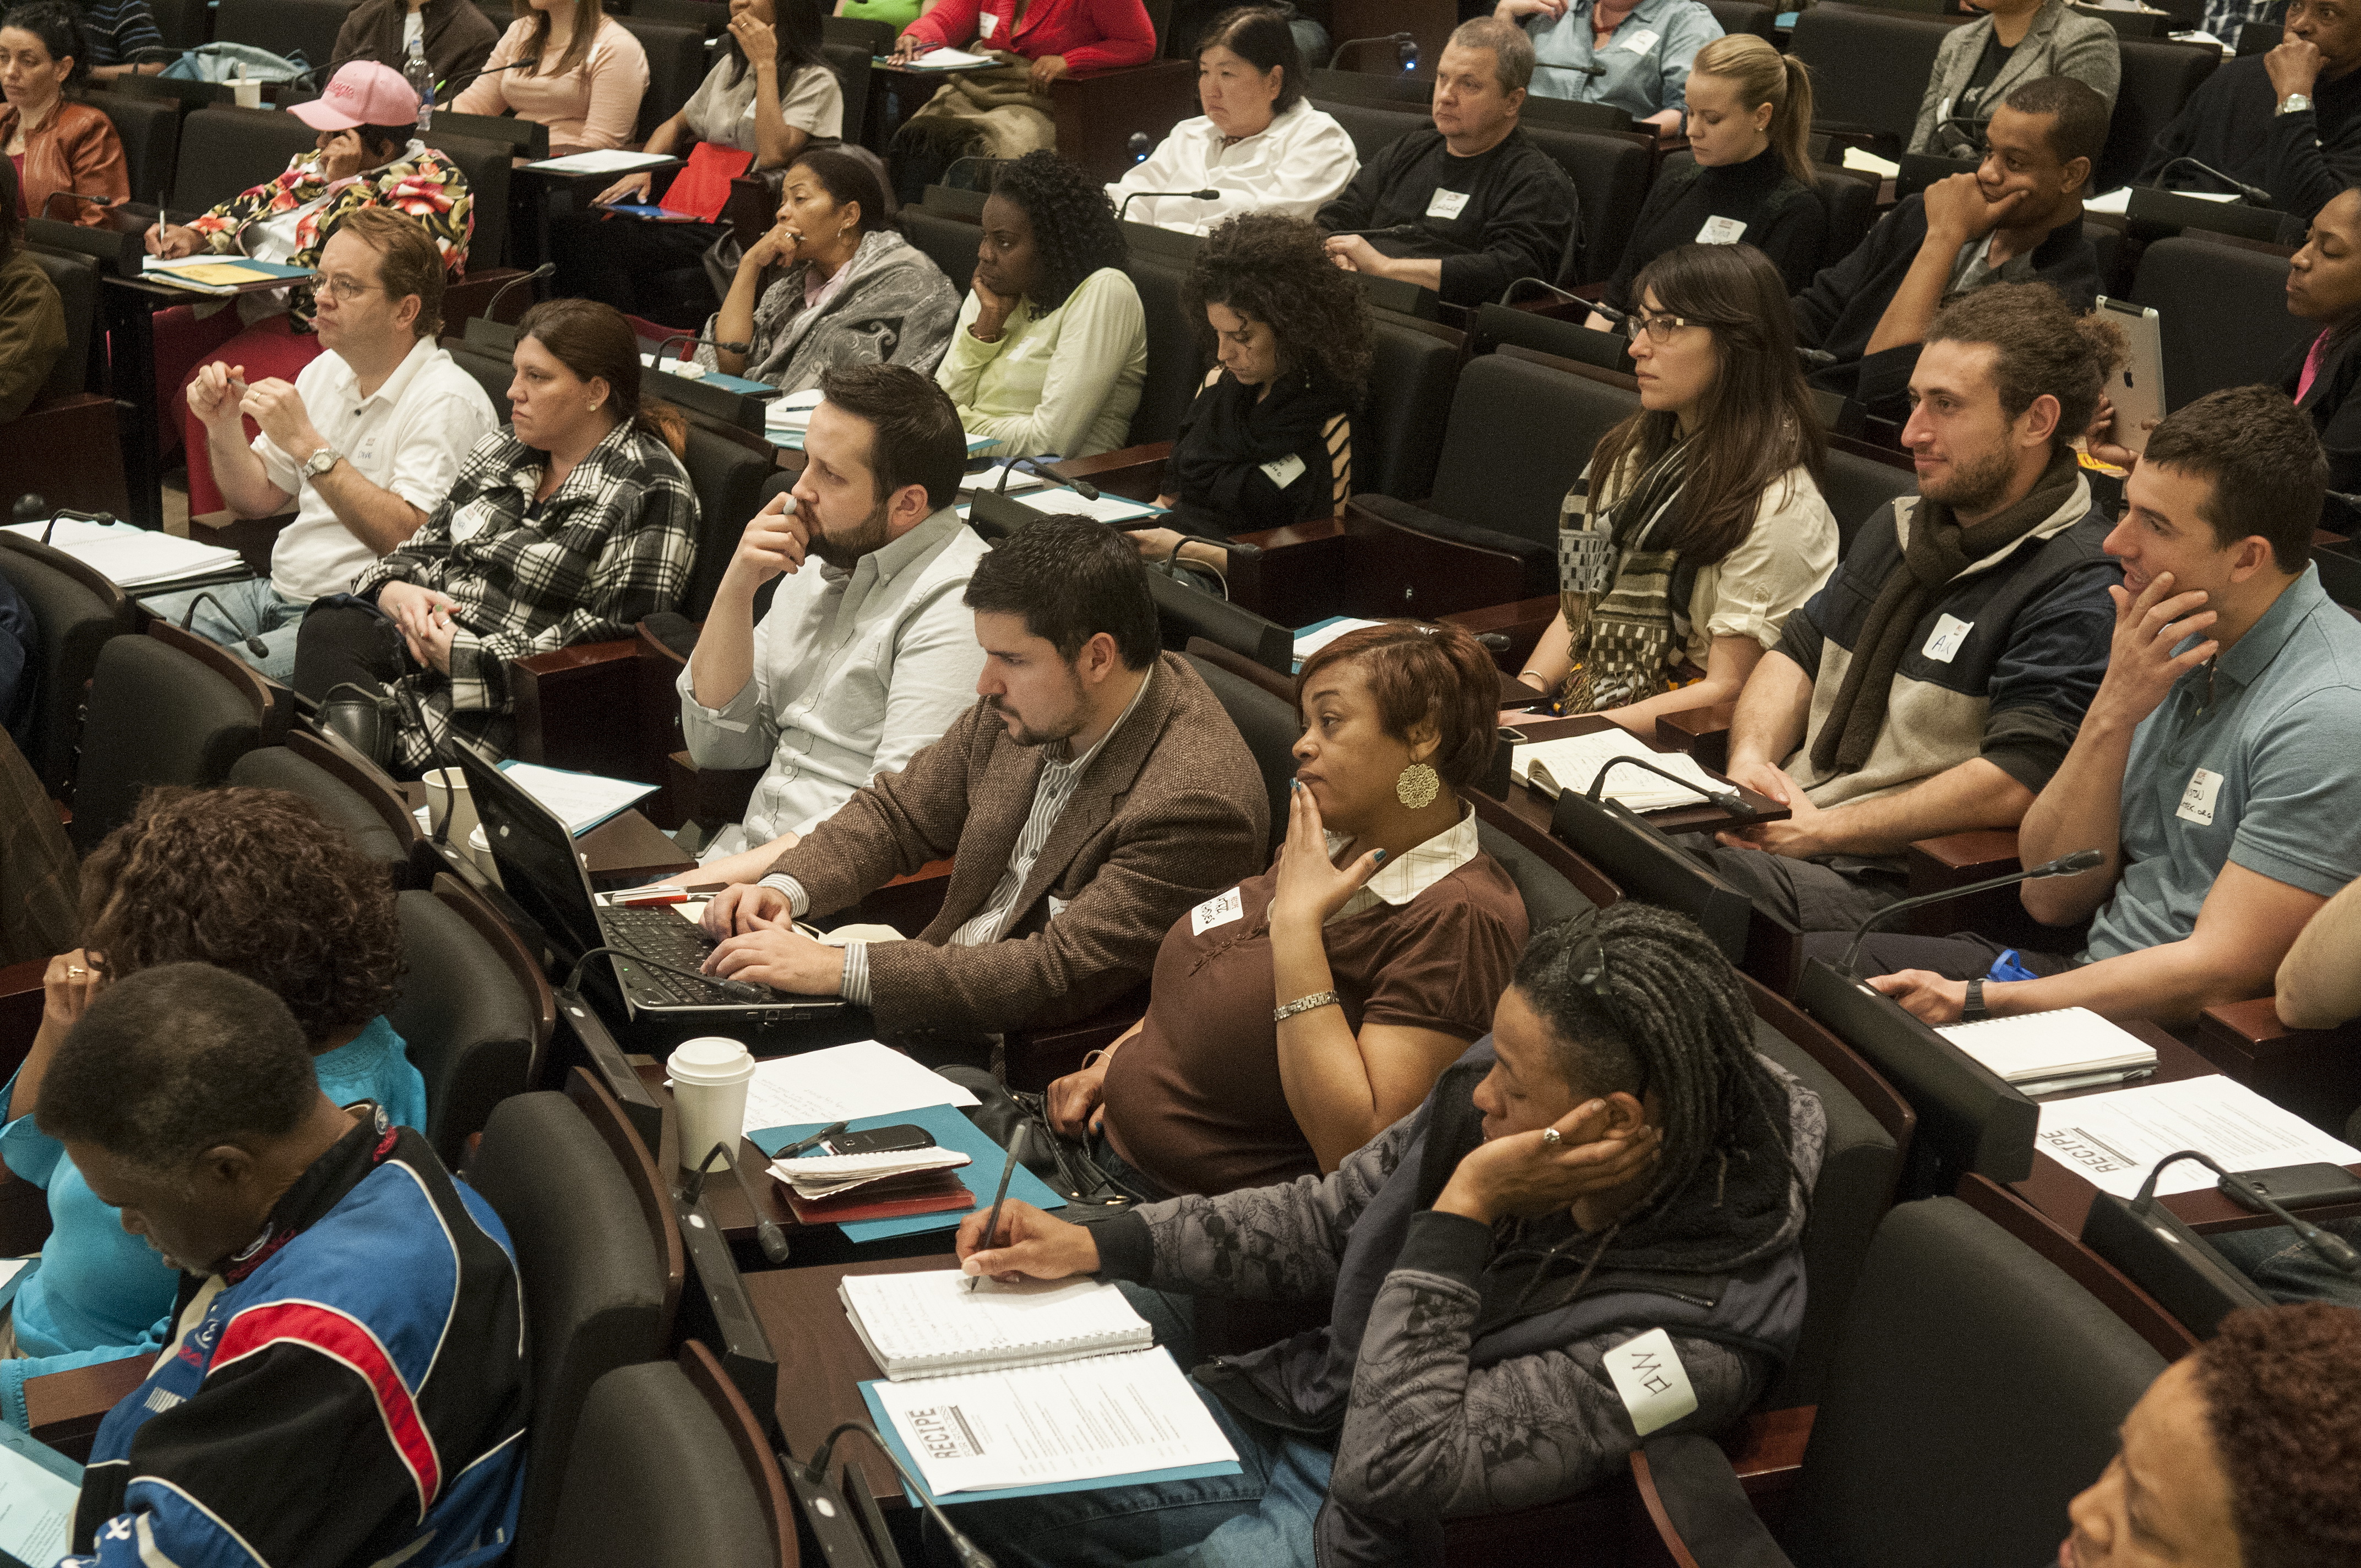 Food entrepreneurs gathered in the Law School's auditorium for the IJ Clinic's "Recipe for Success" conference in April 2013.